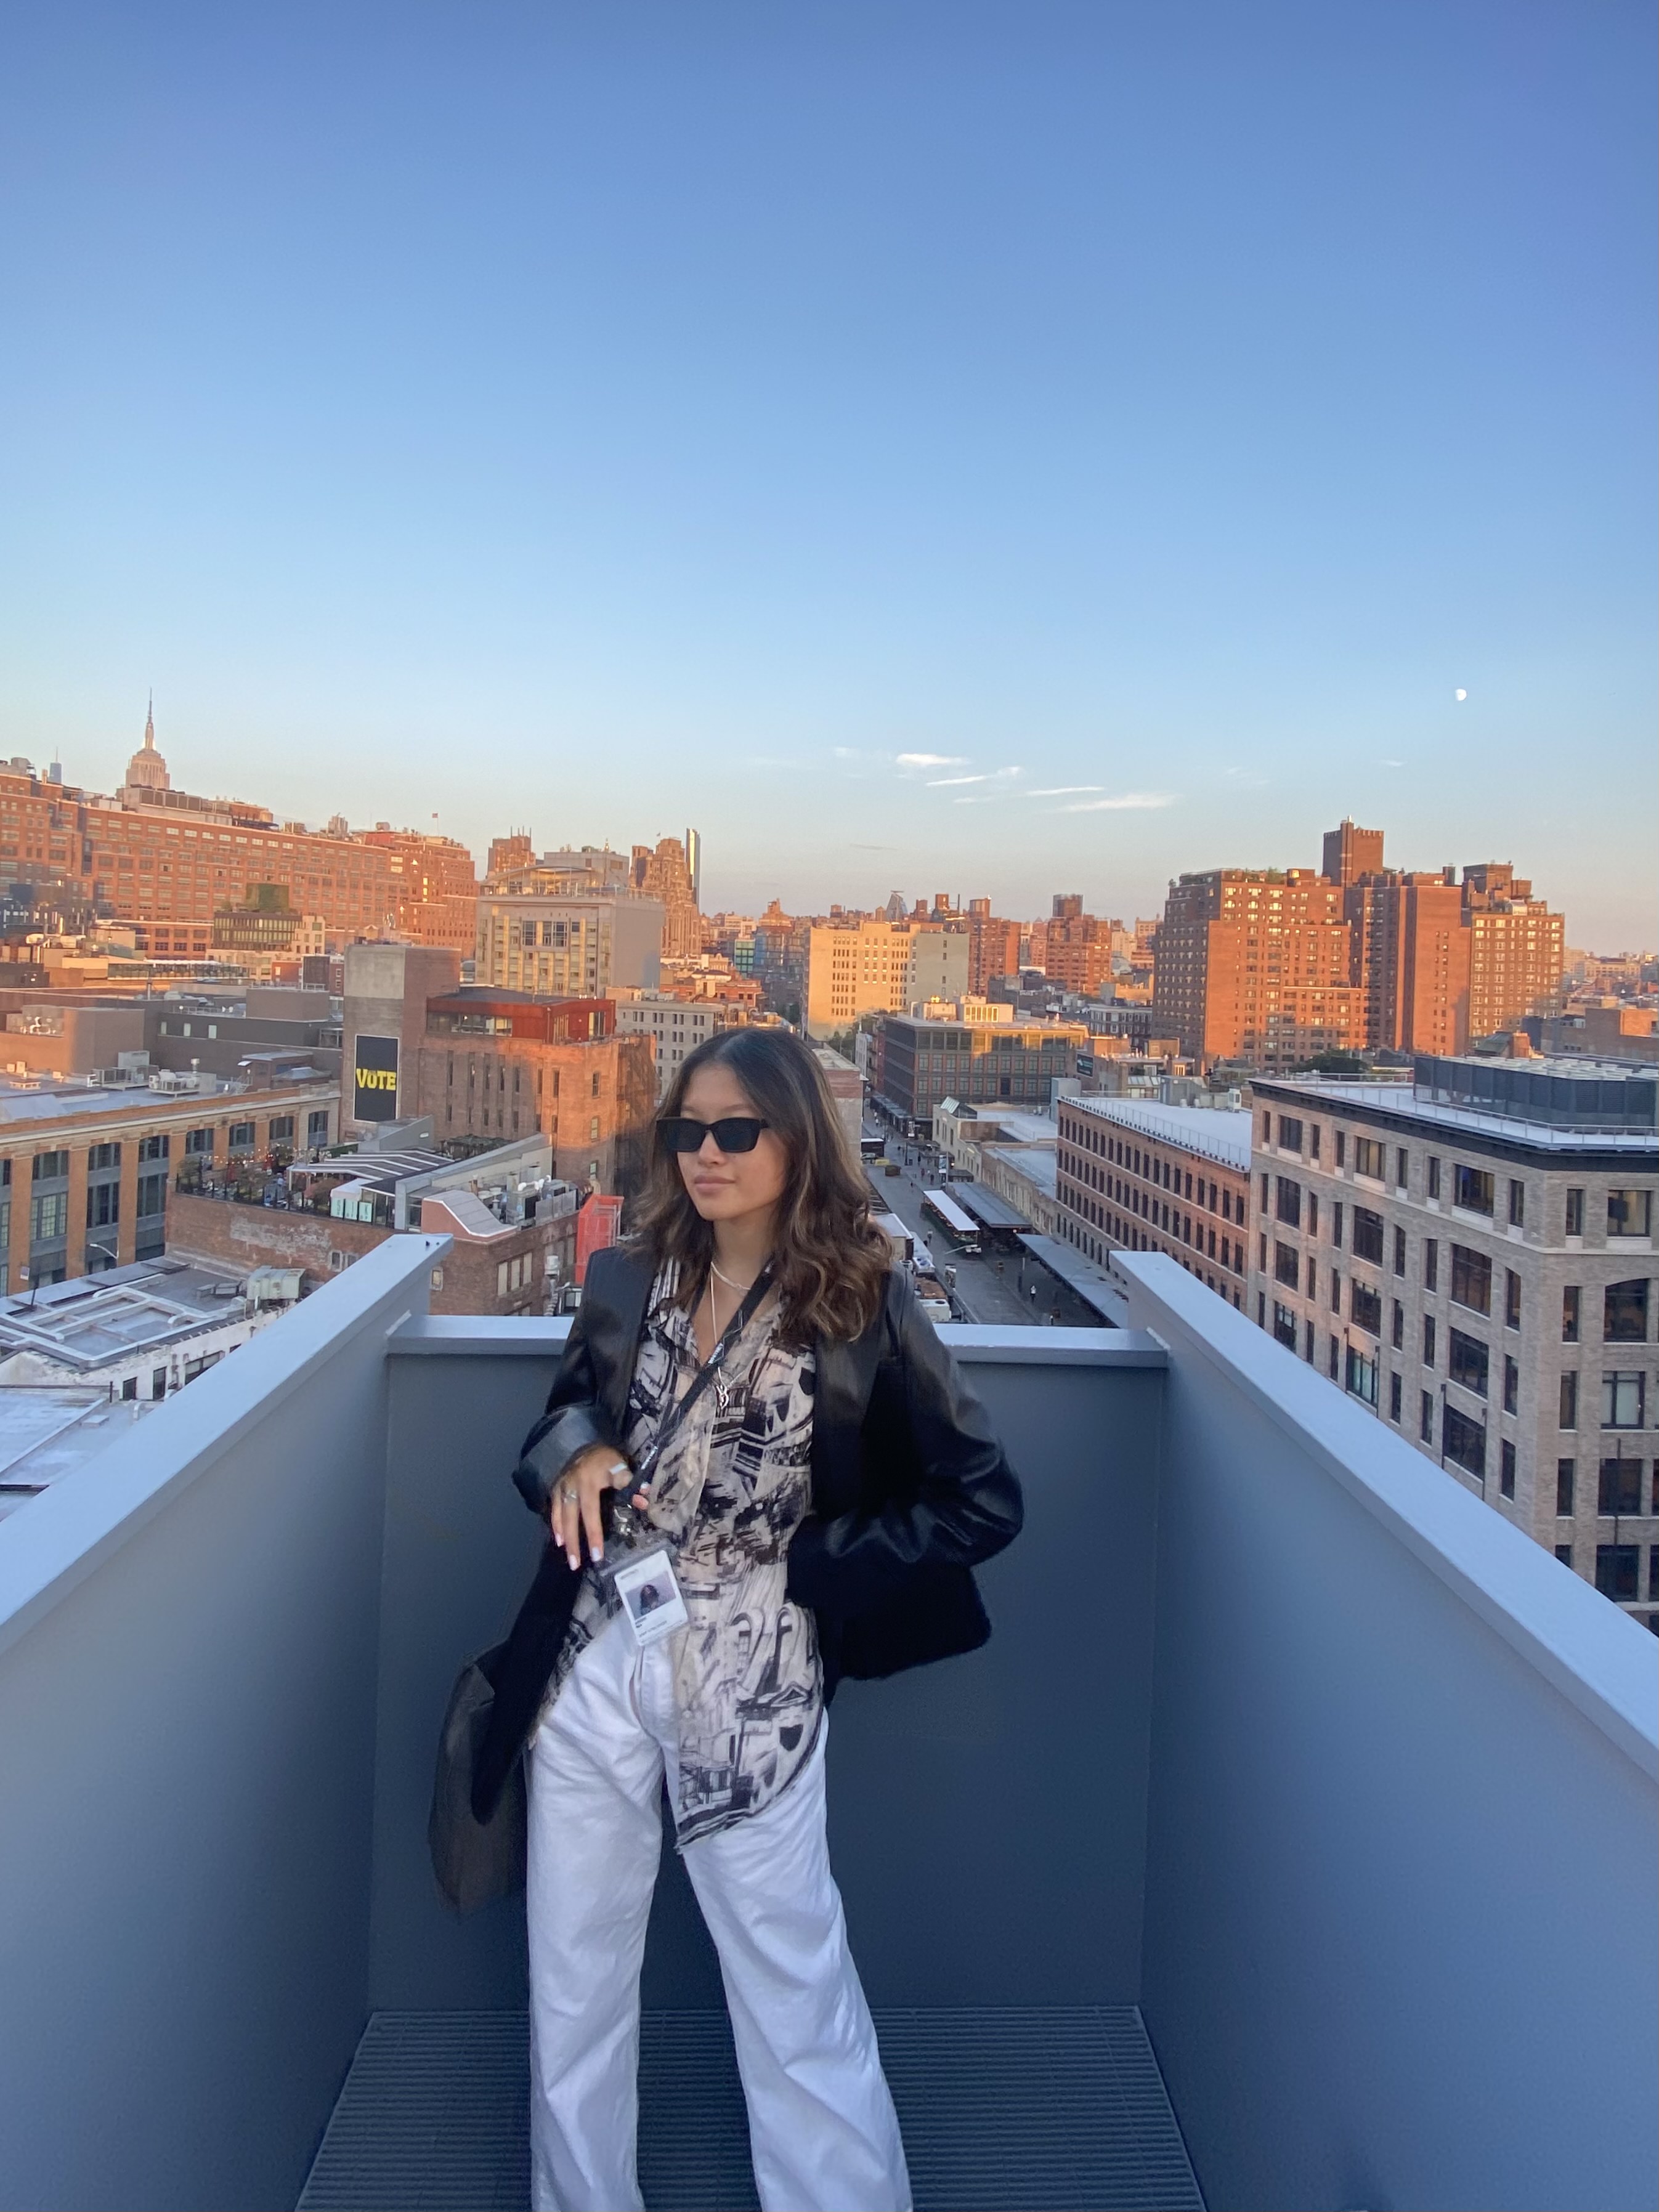 Woman in sunglasses and a leather jacket stands on a rooftop deck with a city skyline behind her.